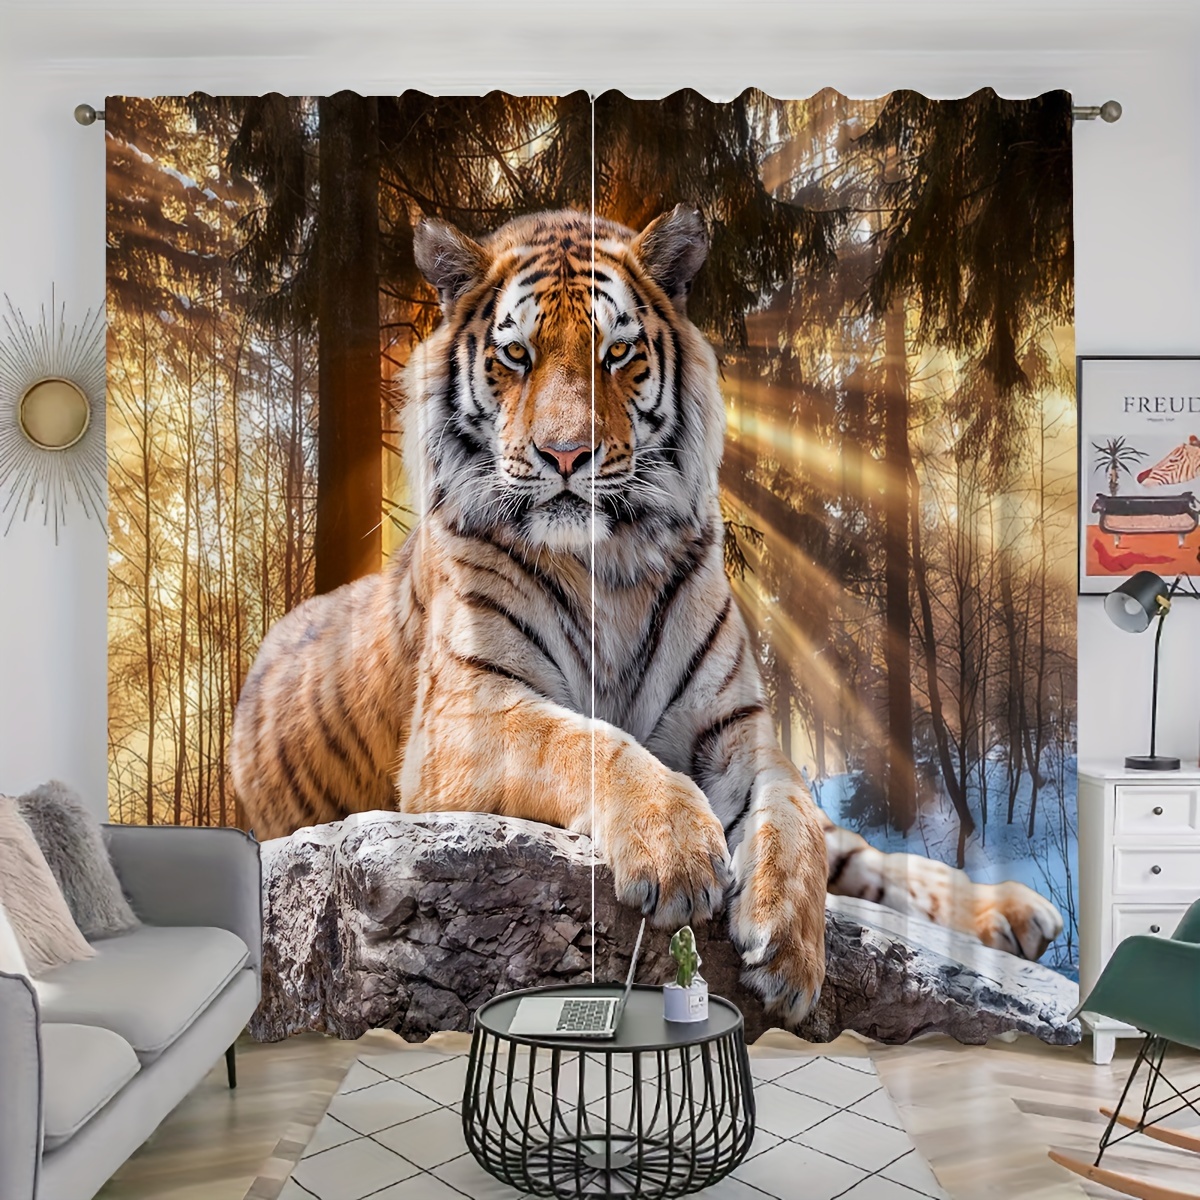 

2pcs, Tiger Printed Curtains, Rod Pocket Curtain, Suitable For Restaurants, Public Places, Living Rooms, Bedrooms, Offices, Study Rooms, Home Decoration